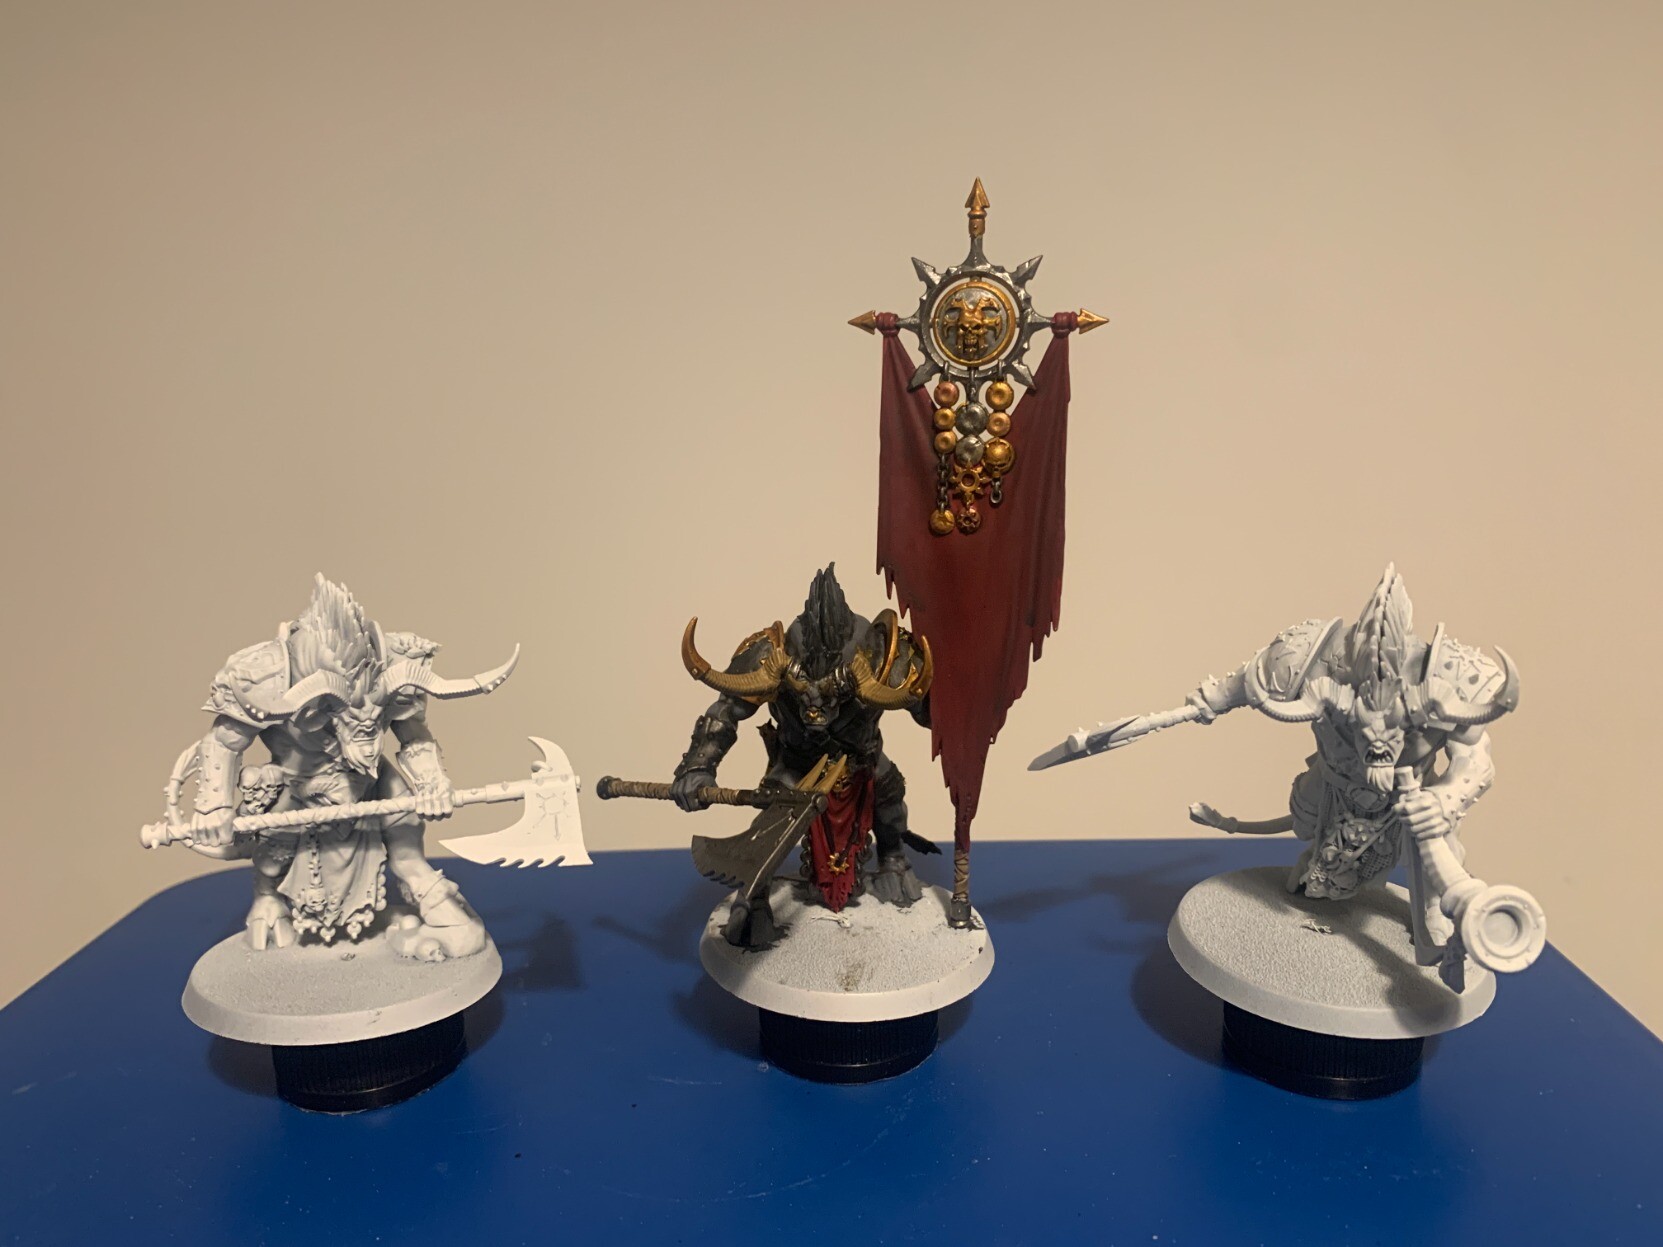 Three Ogroid Theridons. The two outside ones are unpainted and primed in white. The middle one is painted in dark greys with gold trim and is holding a dark red banner. The banner is topped by both silver and gold metal elements.